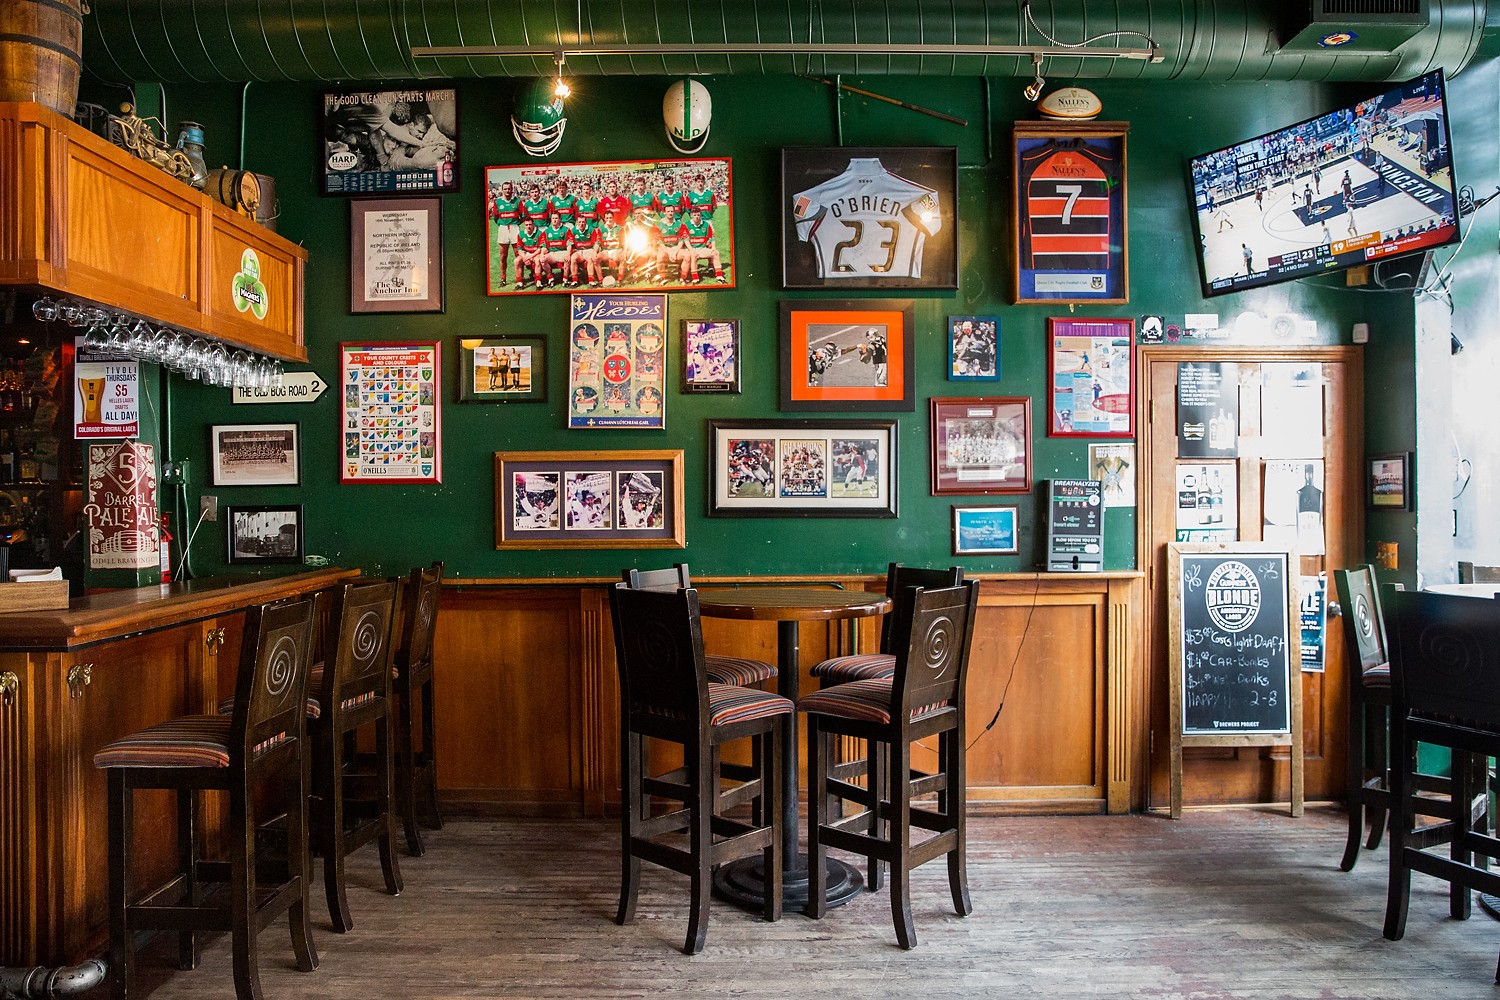 Irish Pubs Attempt 20 Comeback After 20 St. Patrick's Day ...